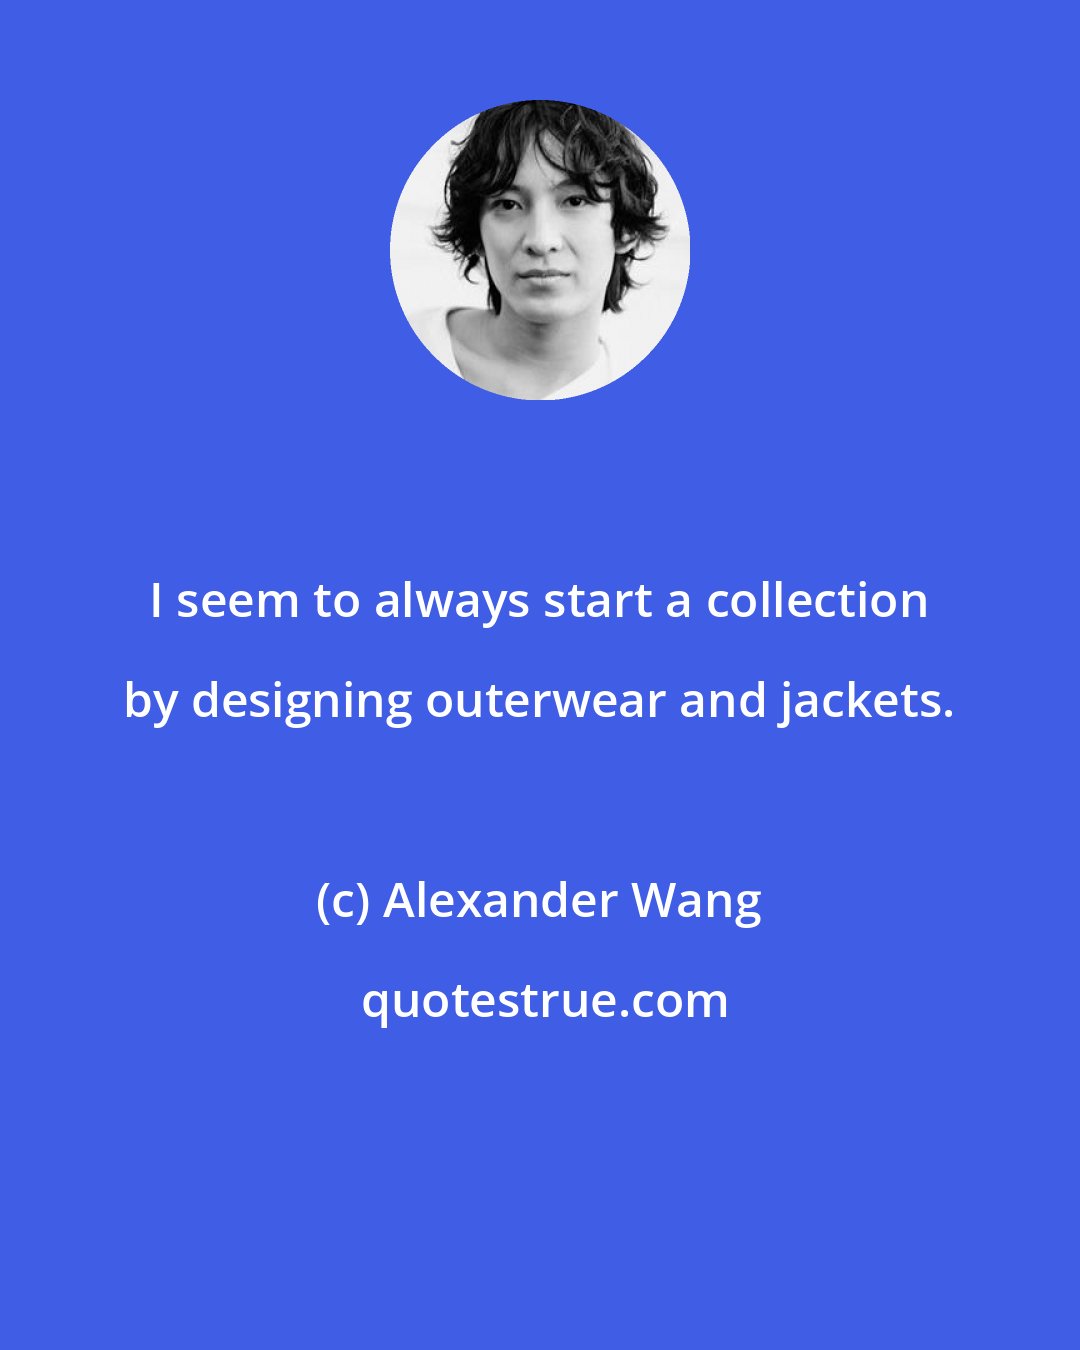 Alexander Wang: I seem to always start a collection by designing outerwear and jackets.